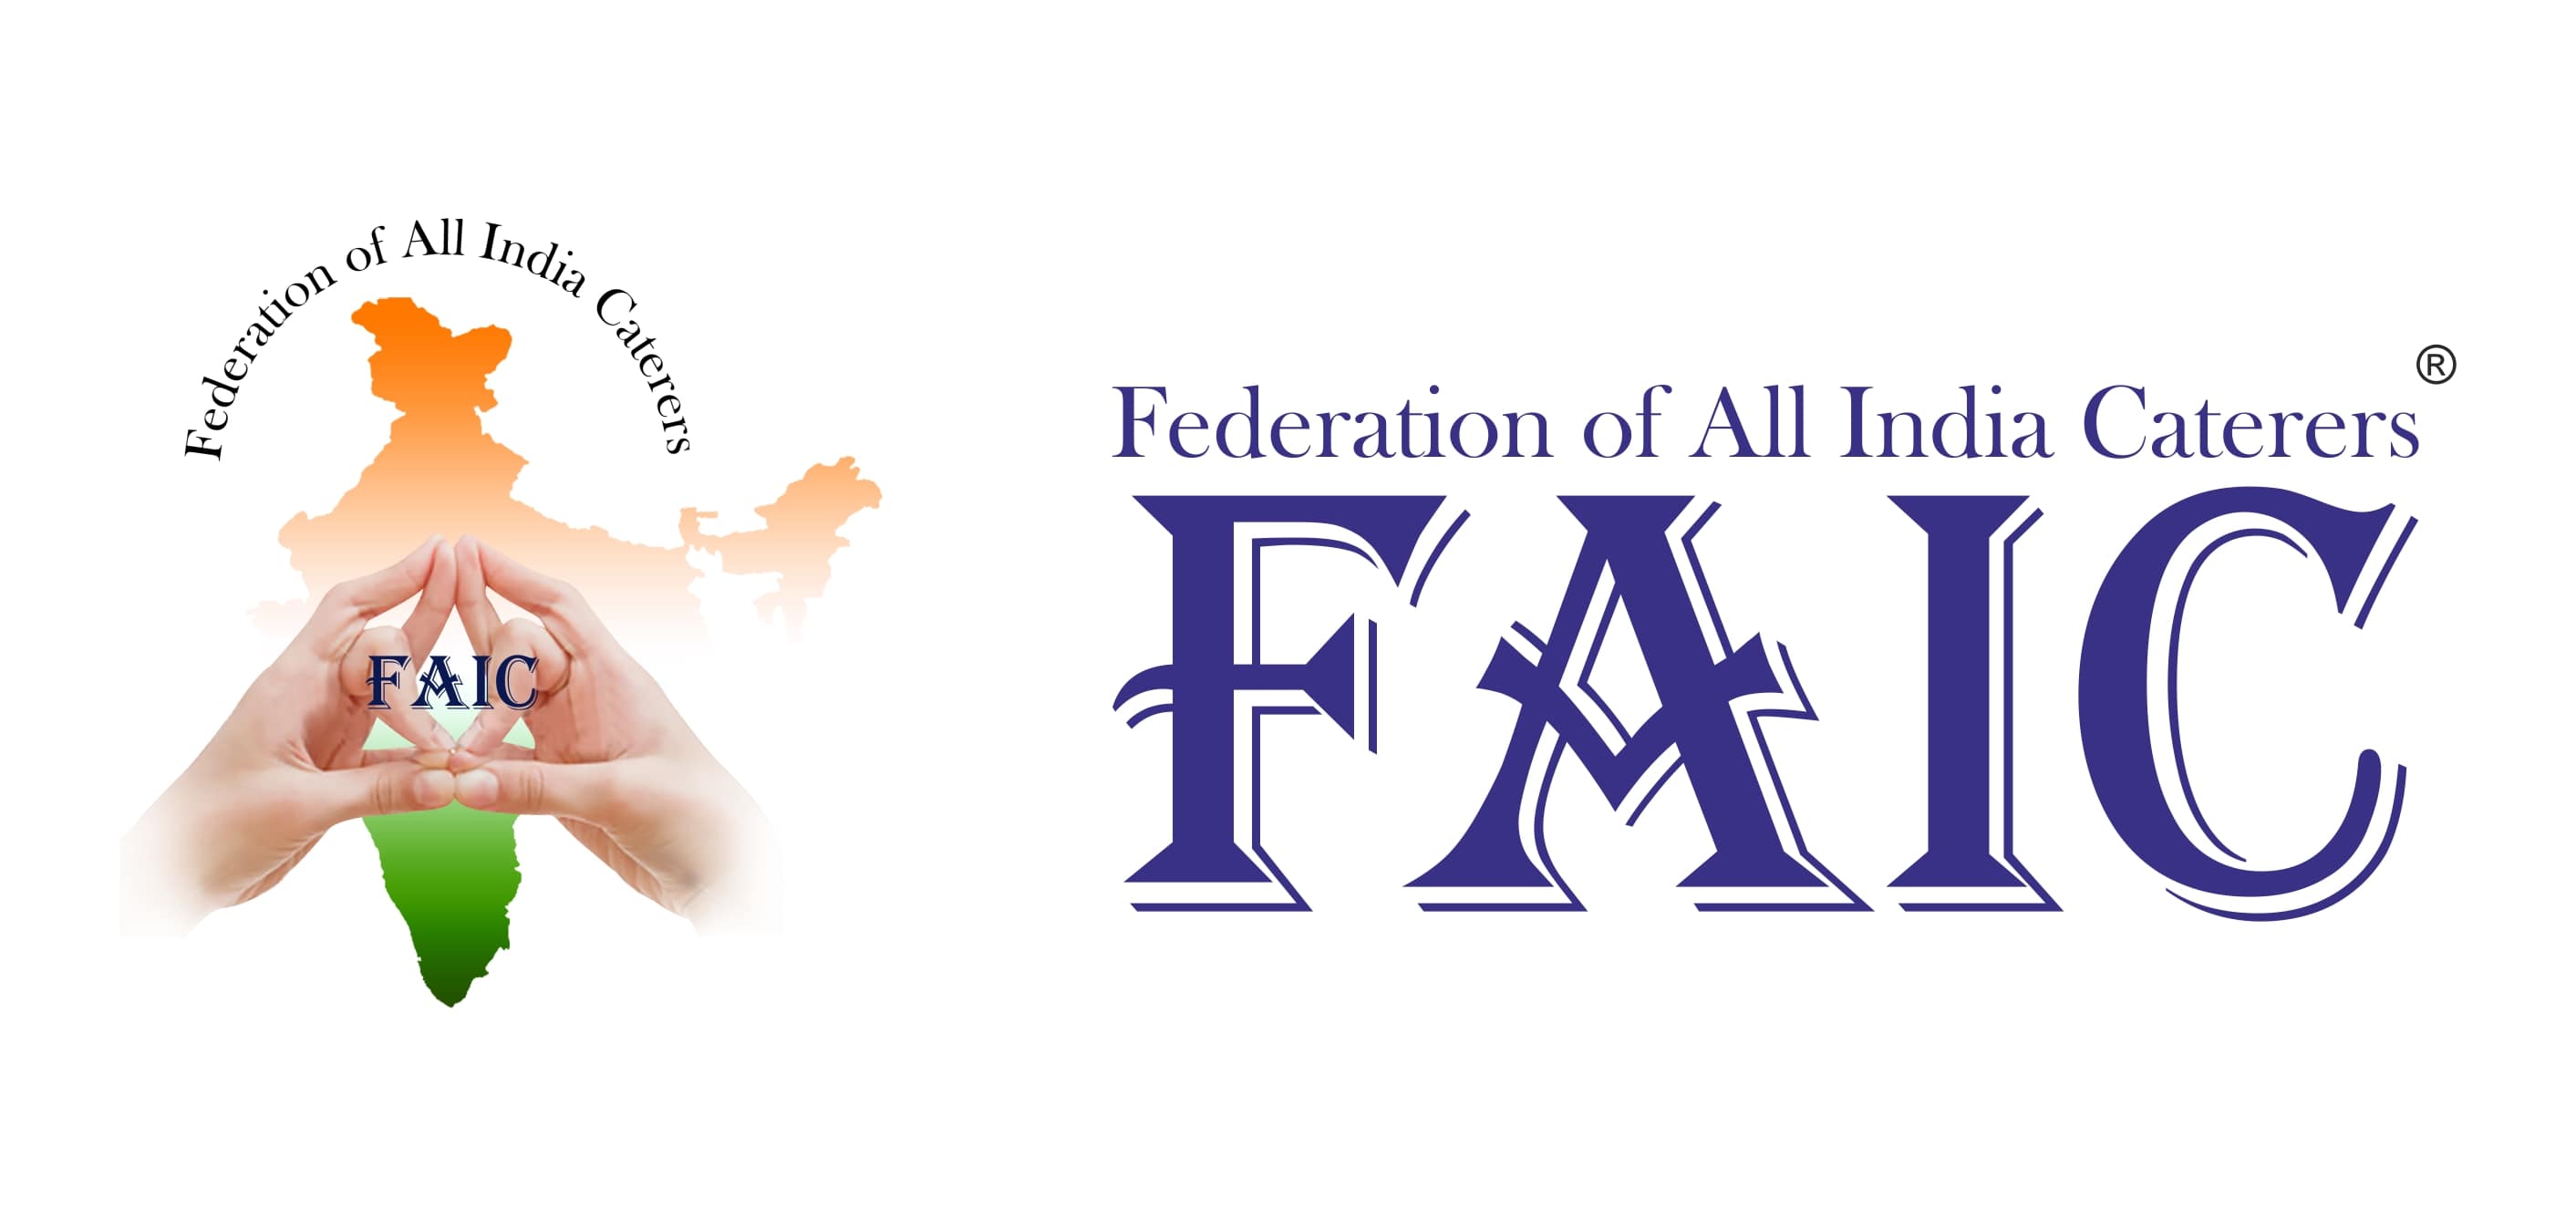 Federation of All India Caterers